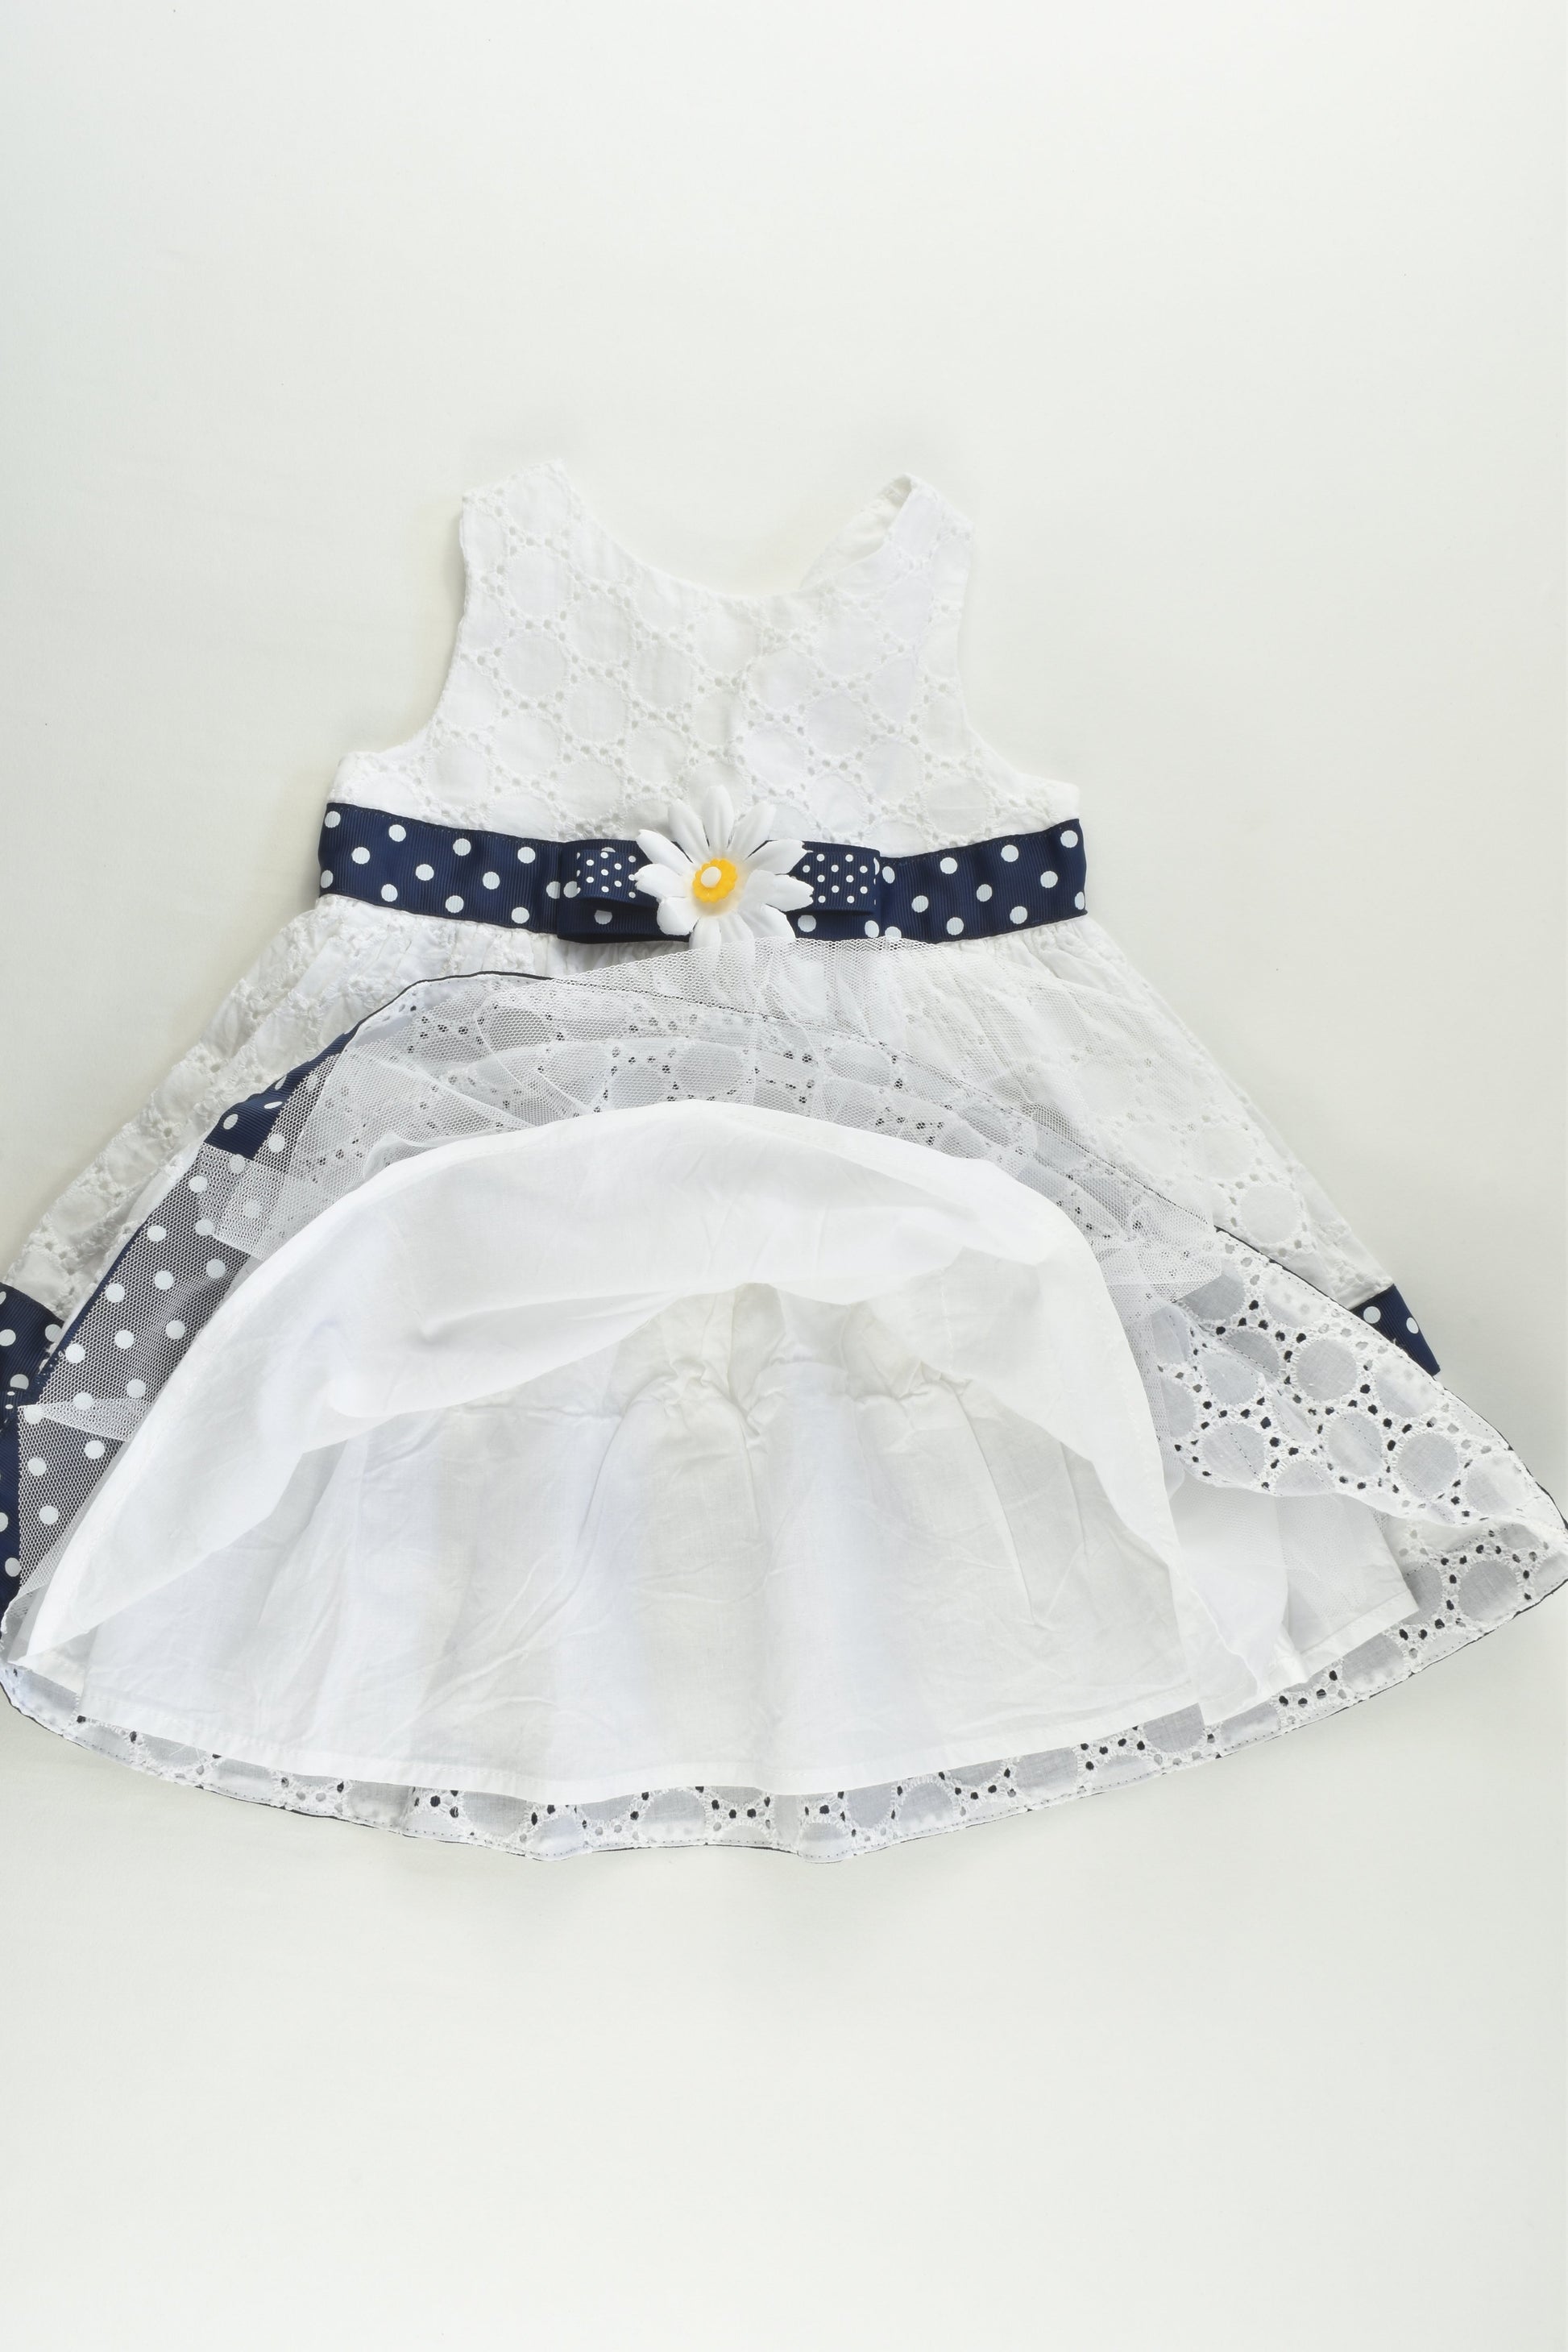 NEW Ollie's Place Size 1 Lined Lace and Daisy Dress